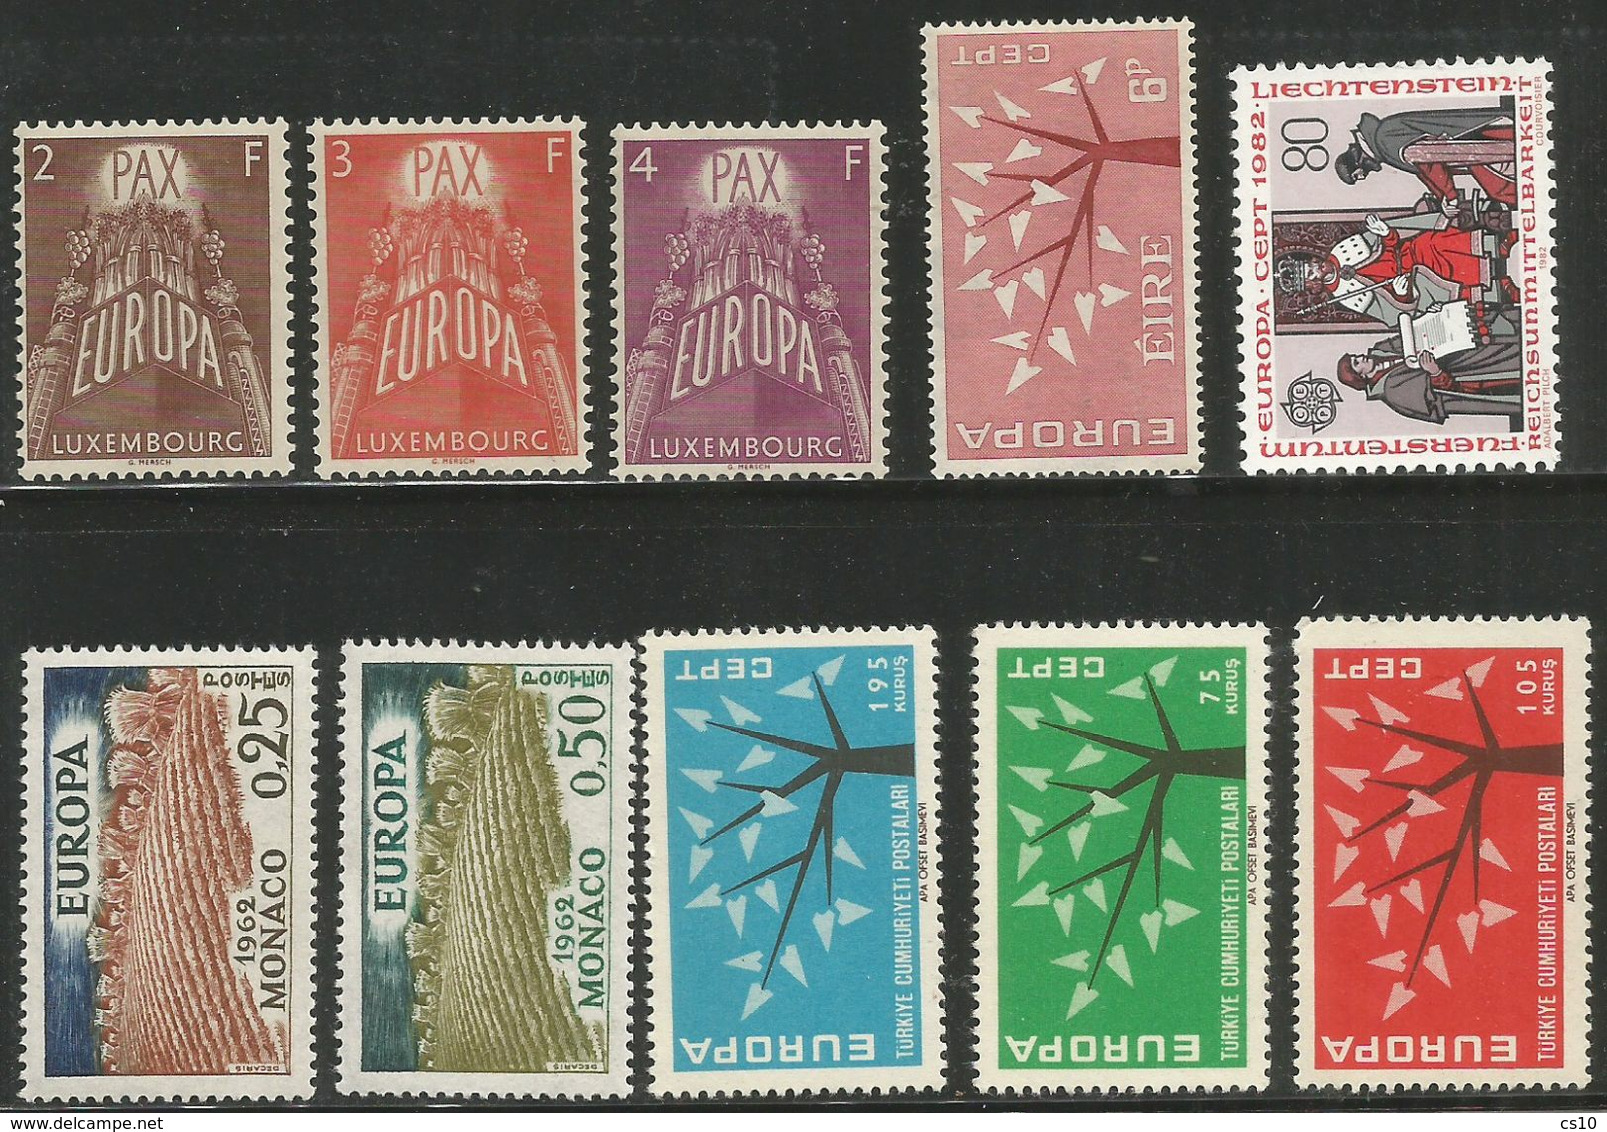 Europa CEPT Selection MNH ** Issues Including SCARCE Luxembourg 1957 + Serbian Ethnic Krajna - Very High Cat Value - Sammlungen